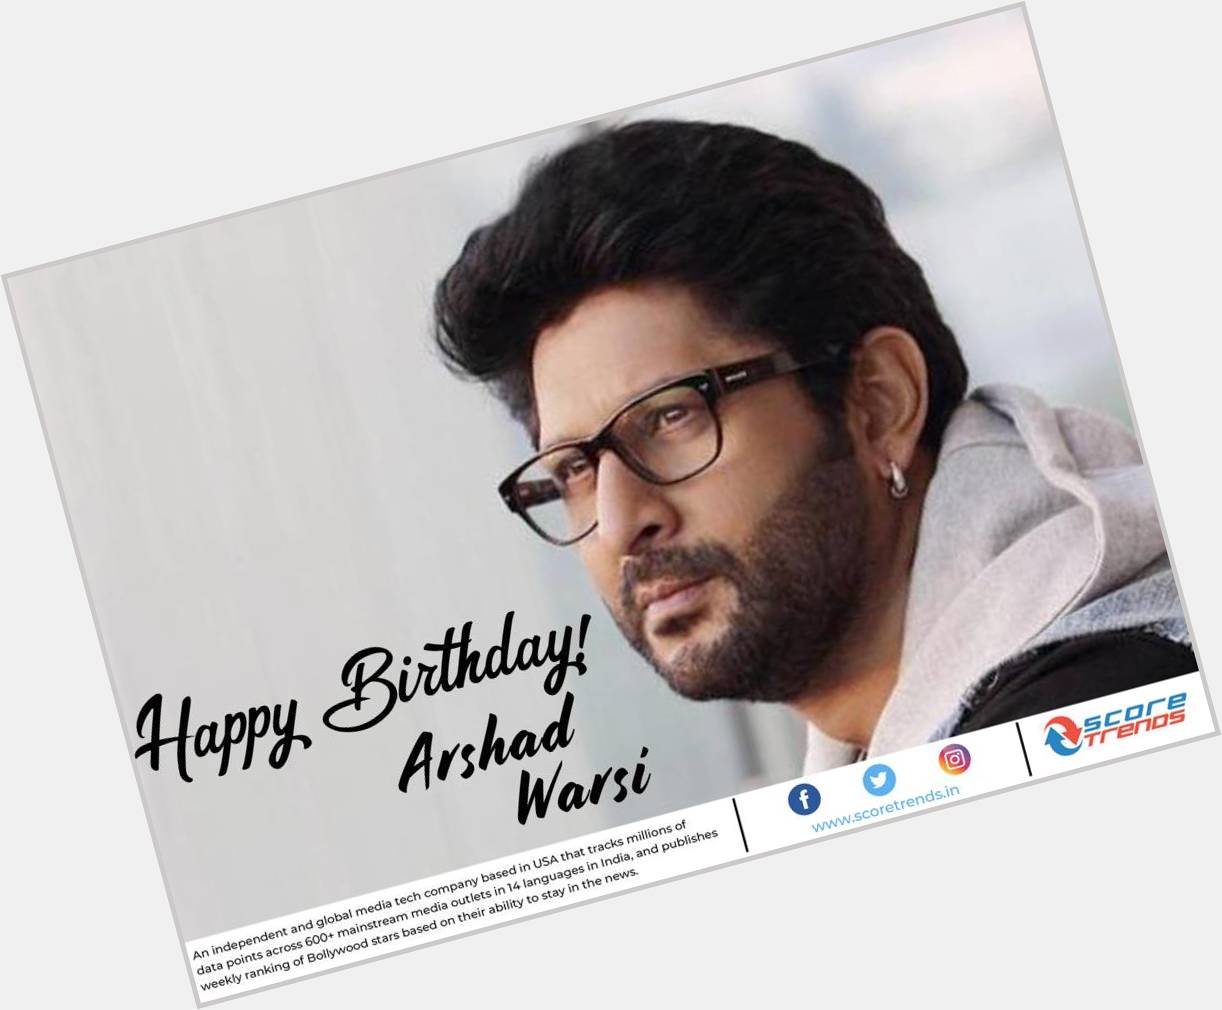 Score Trends wishes Arshad Warsi a Happy Birthday!! 